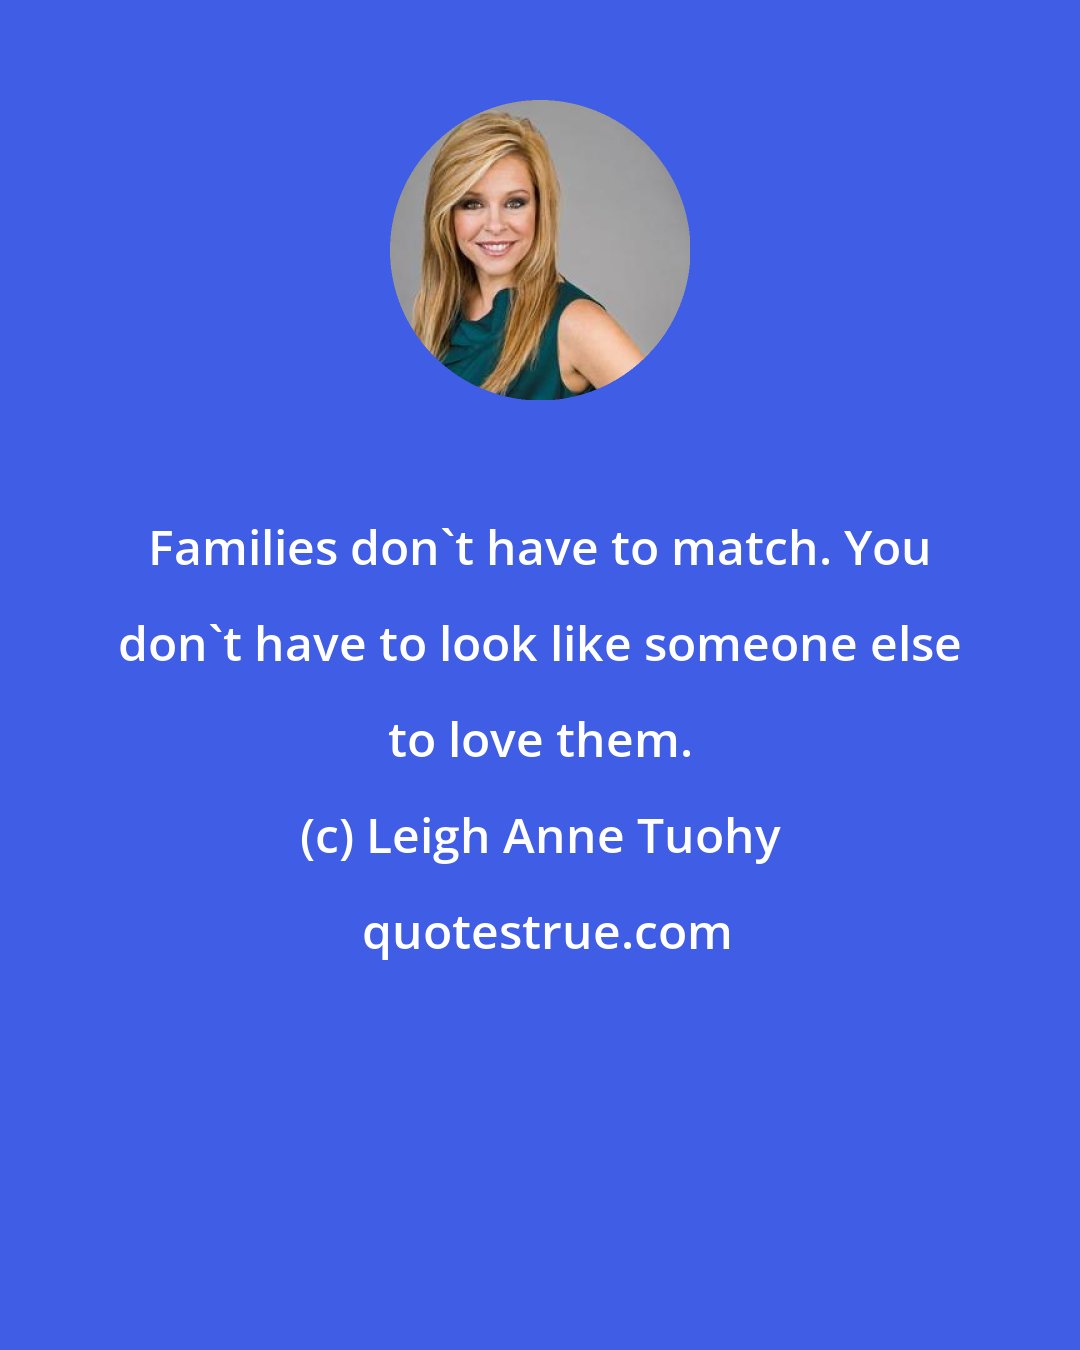 Leigh Anne Tuohy: Families don't have to match. You don't have to look like someone else to love them.